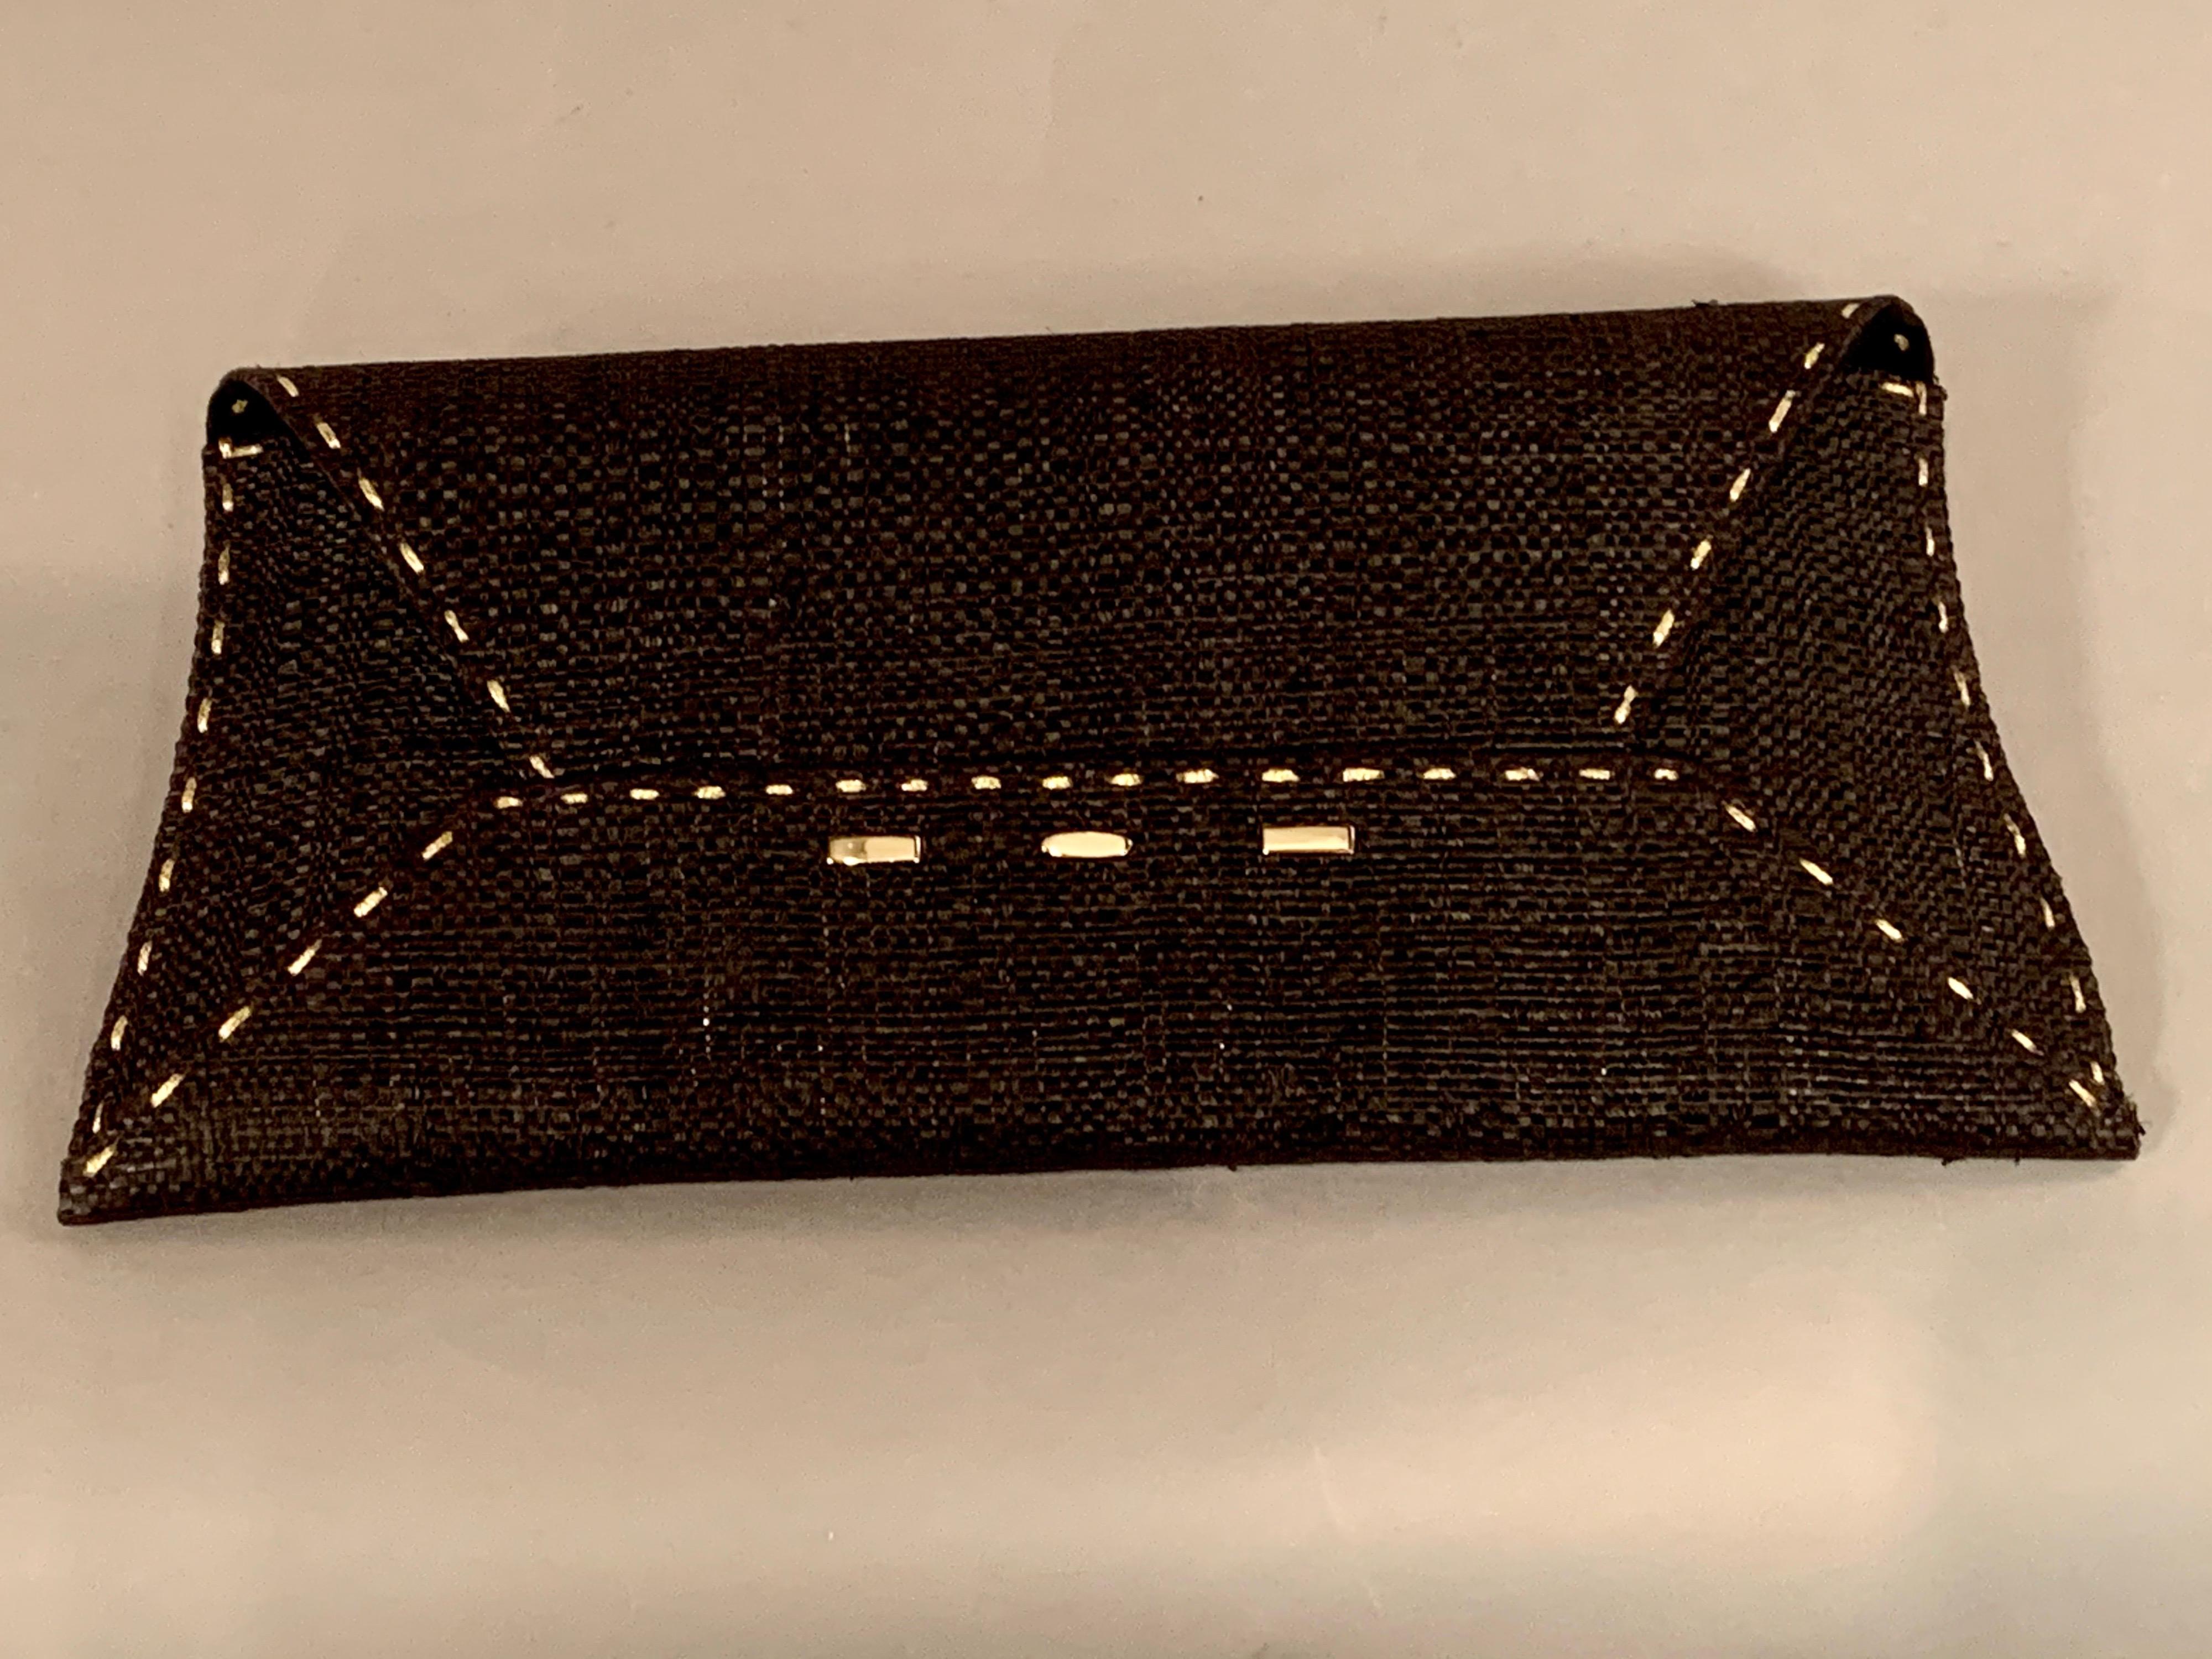 VBH Manila Clutch Black Woven Straw with Gold Accents 3